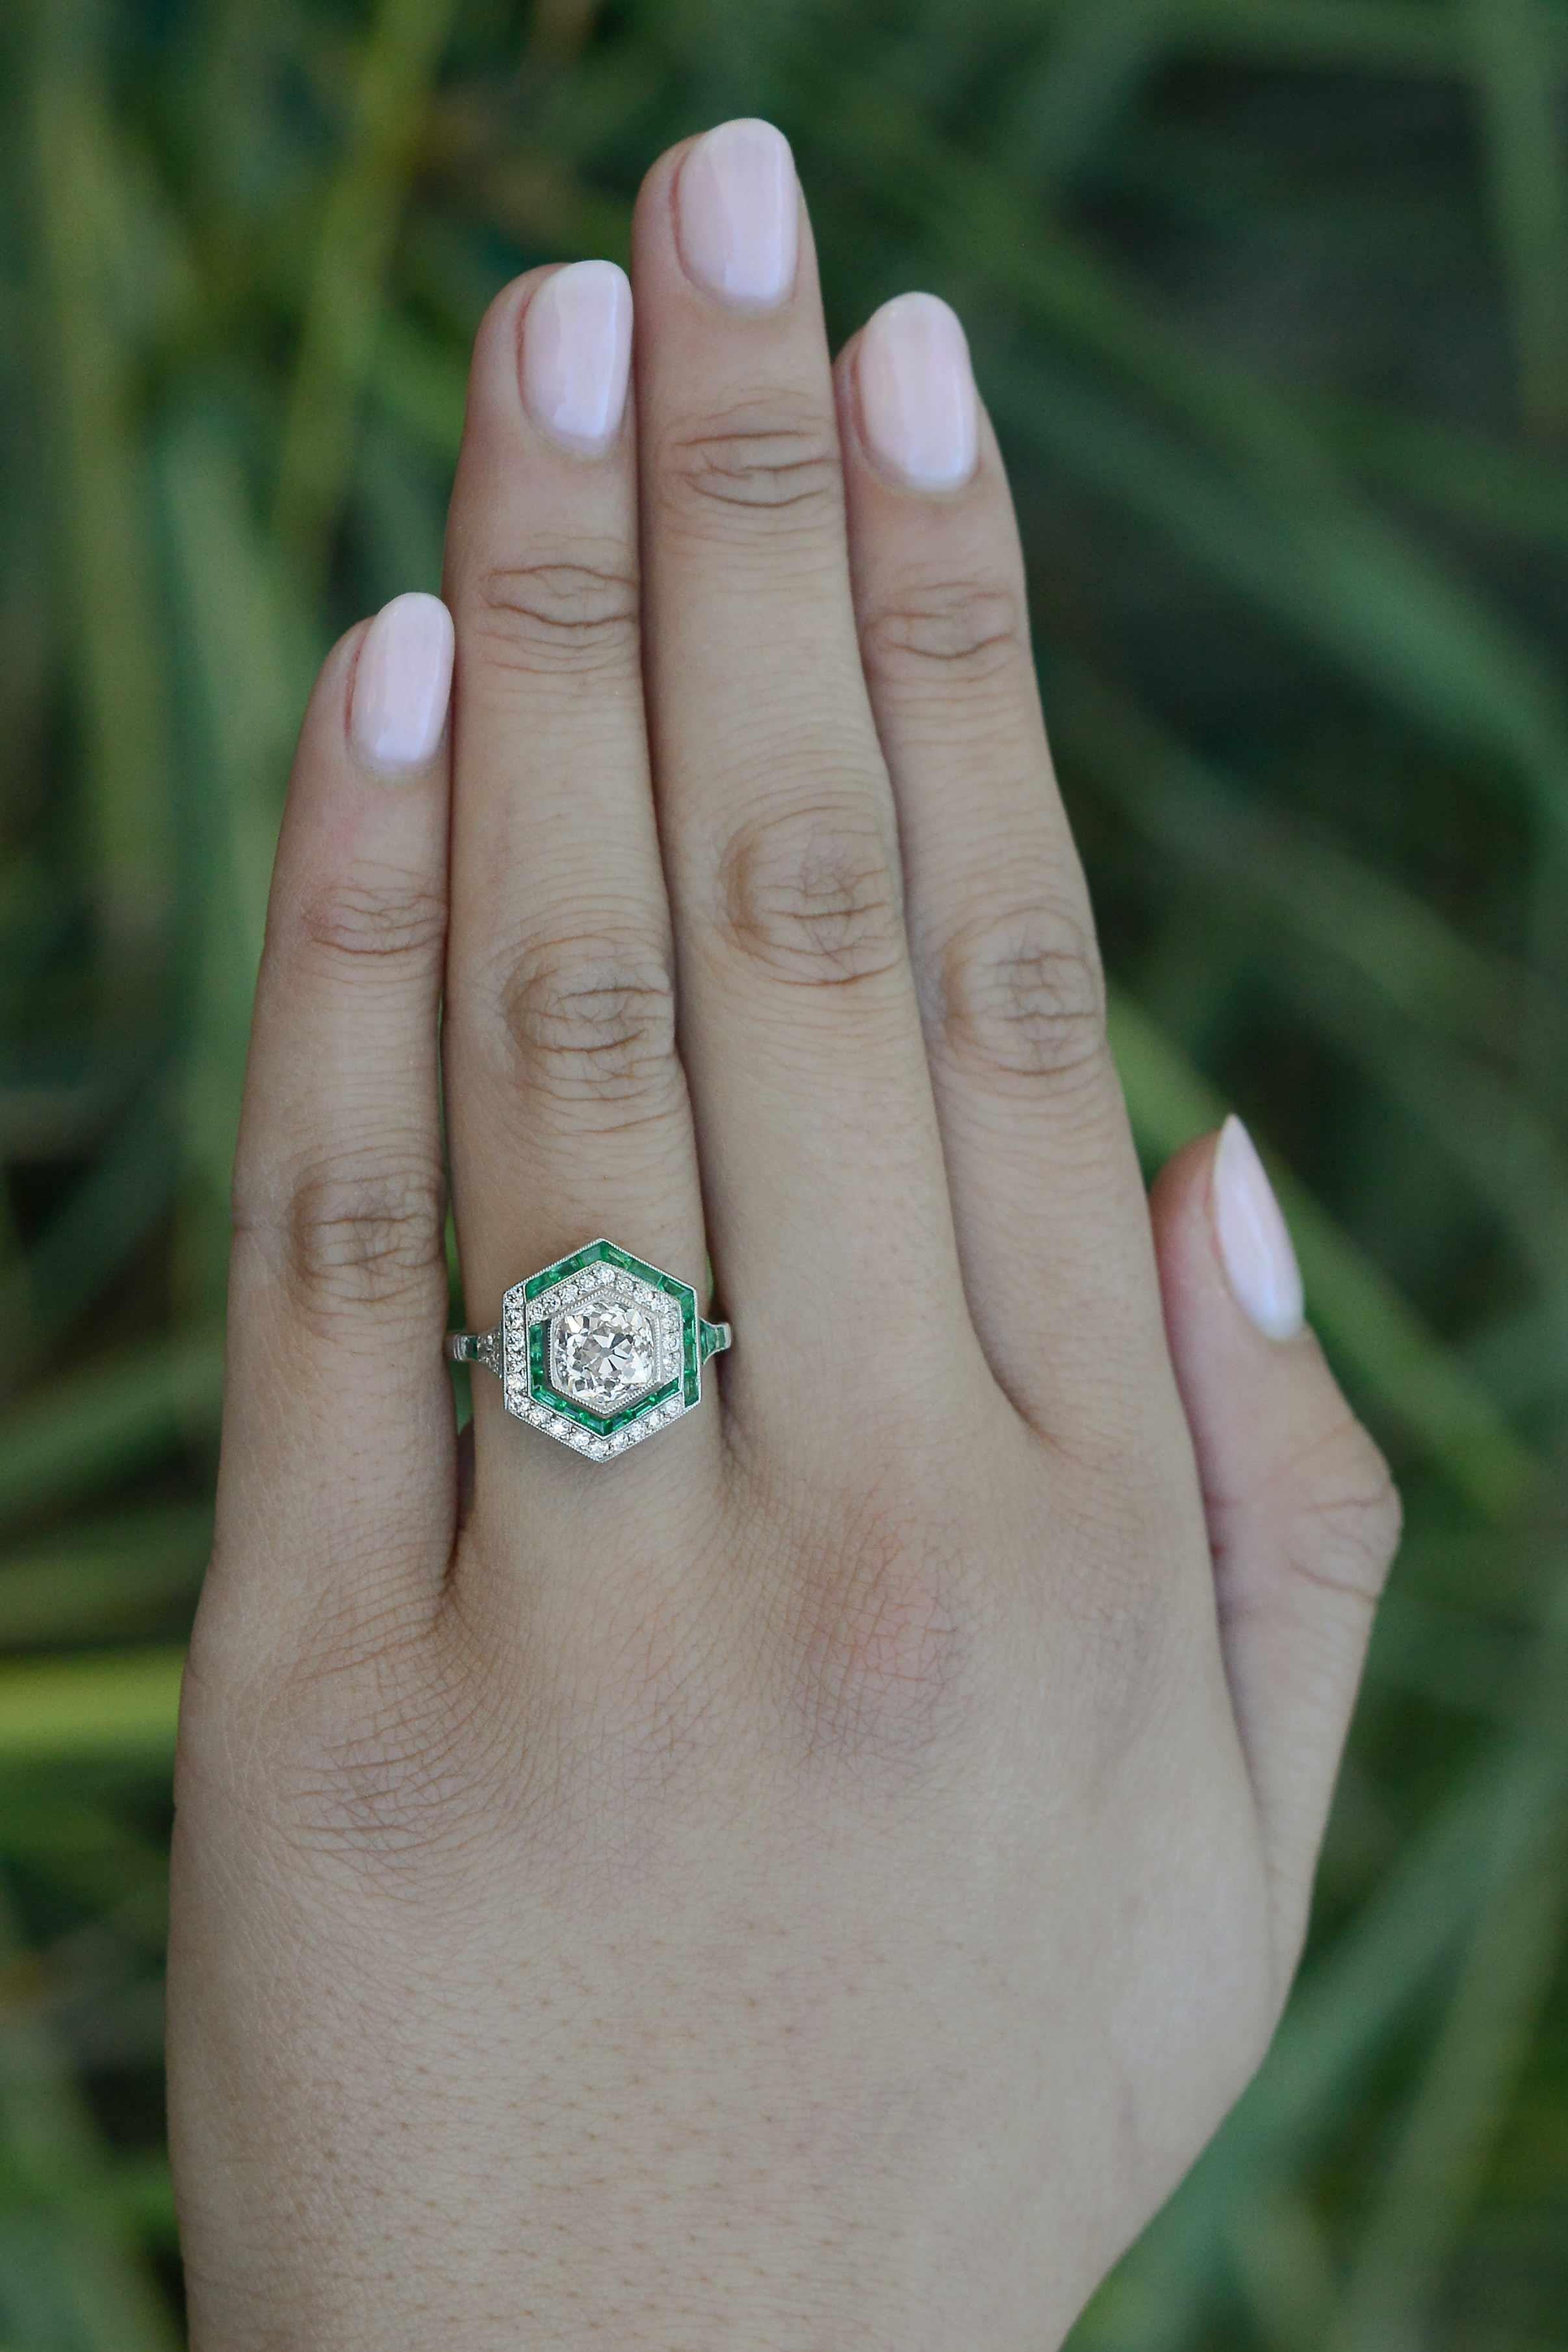 This gorgeous asymmetrical emerald halo diamond engagement ring is a one of a kind treasure that is truly jaw dropping. Hand fabricated in the manner of the Art Deco era of platinum using old world techniques and tools, our jeweler has created a